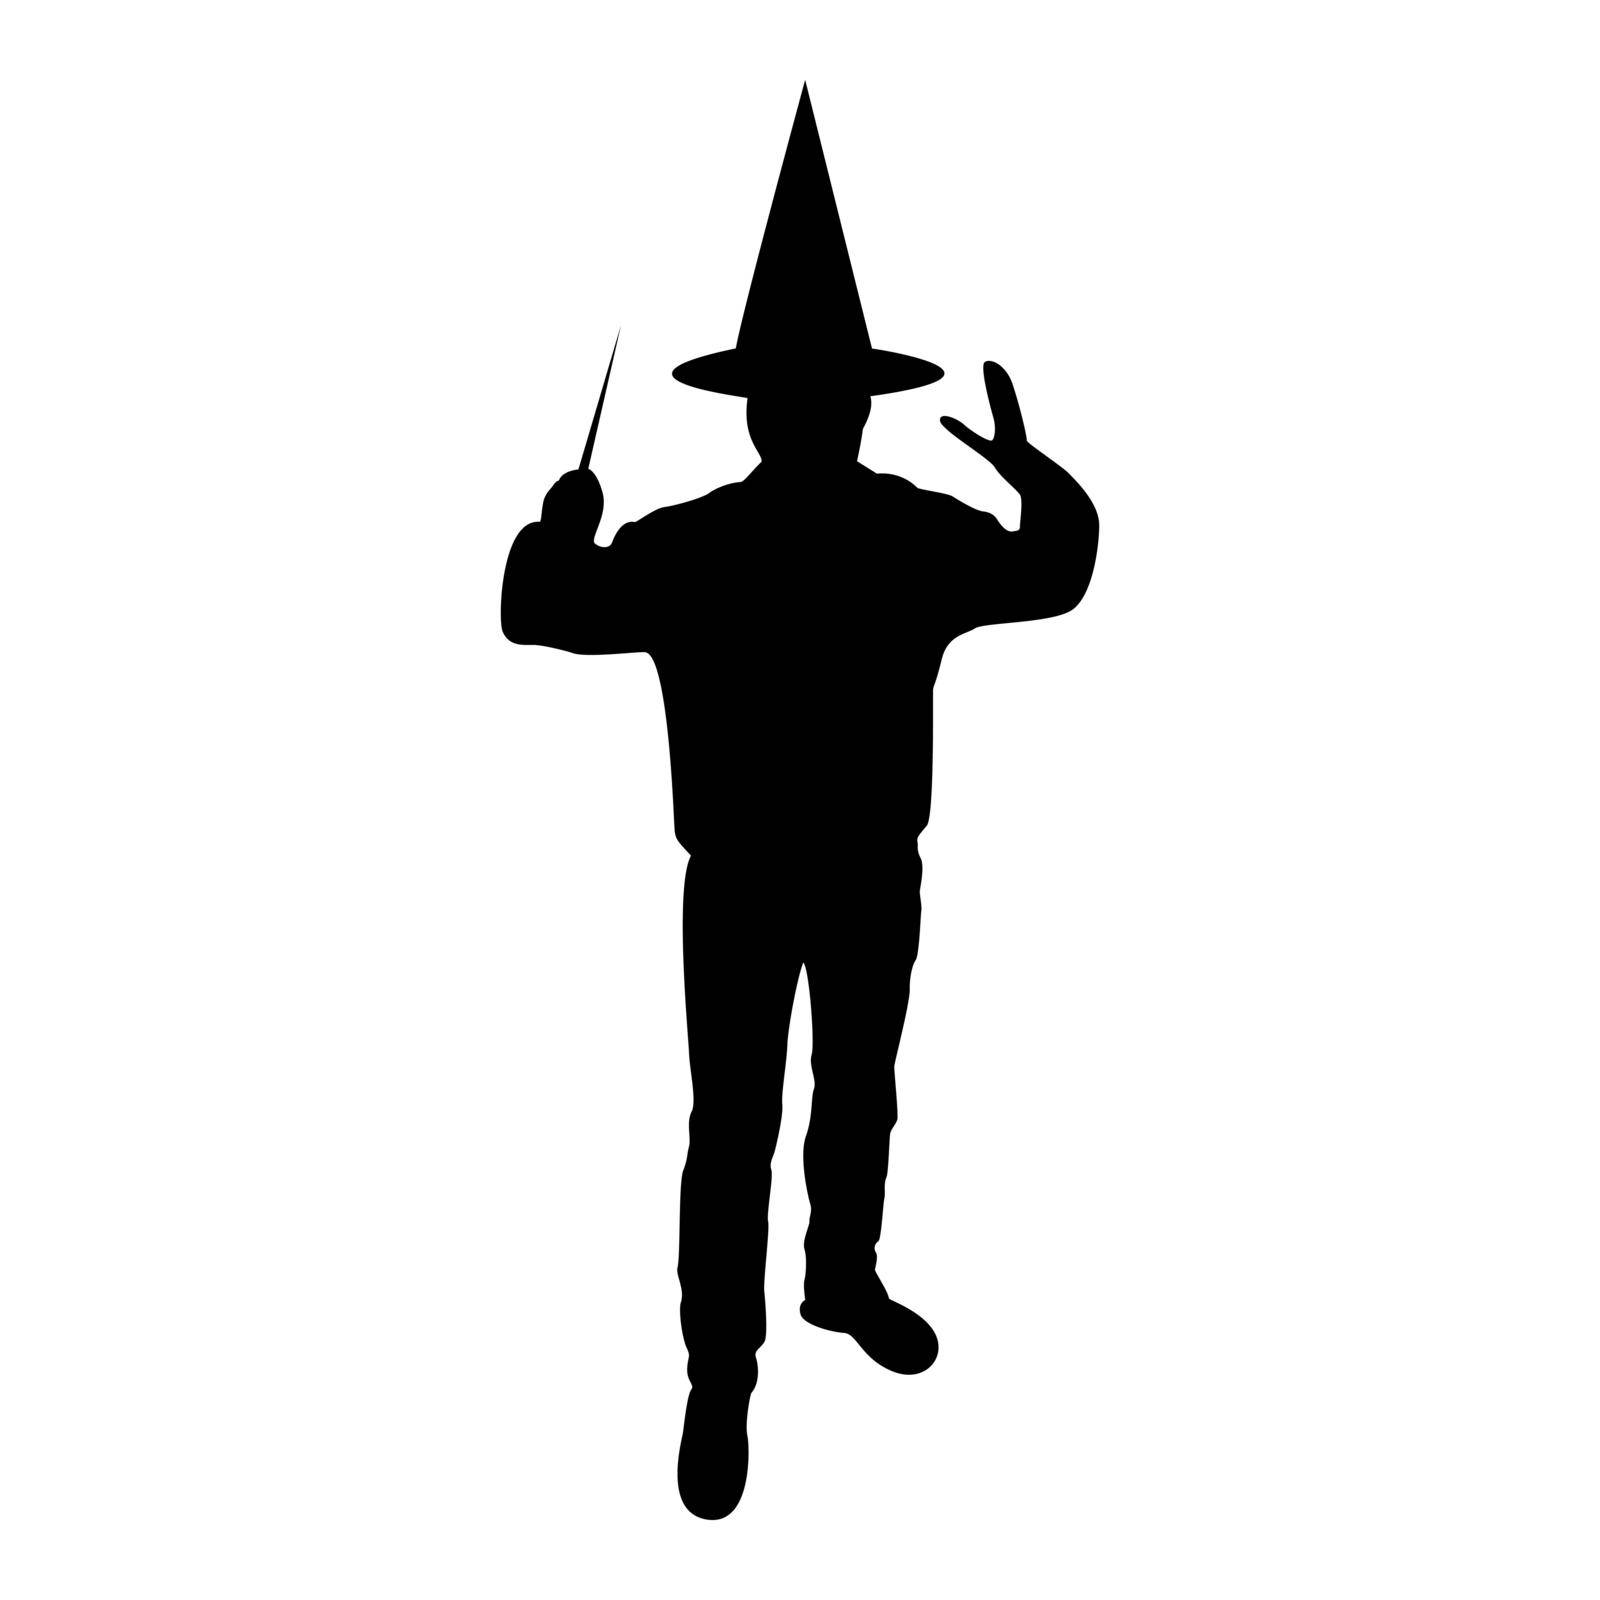 Silhouette wizard holds magic wand trick waving sorcery concept magician sorcerer fantasy person warlock man in robe with magical stick witchcraft in hat mantle mage conjure mystery idea enchantment black color vector illustration flat style simple image